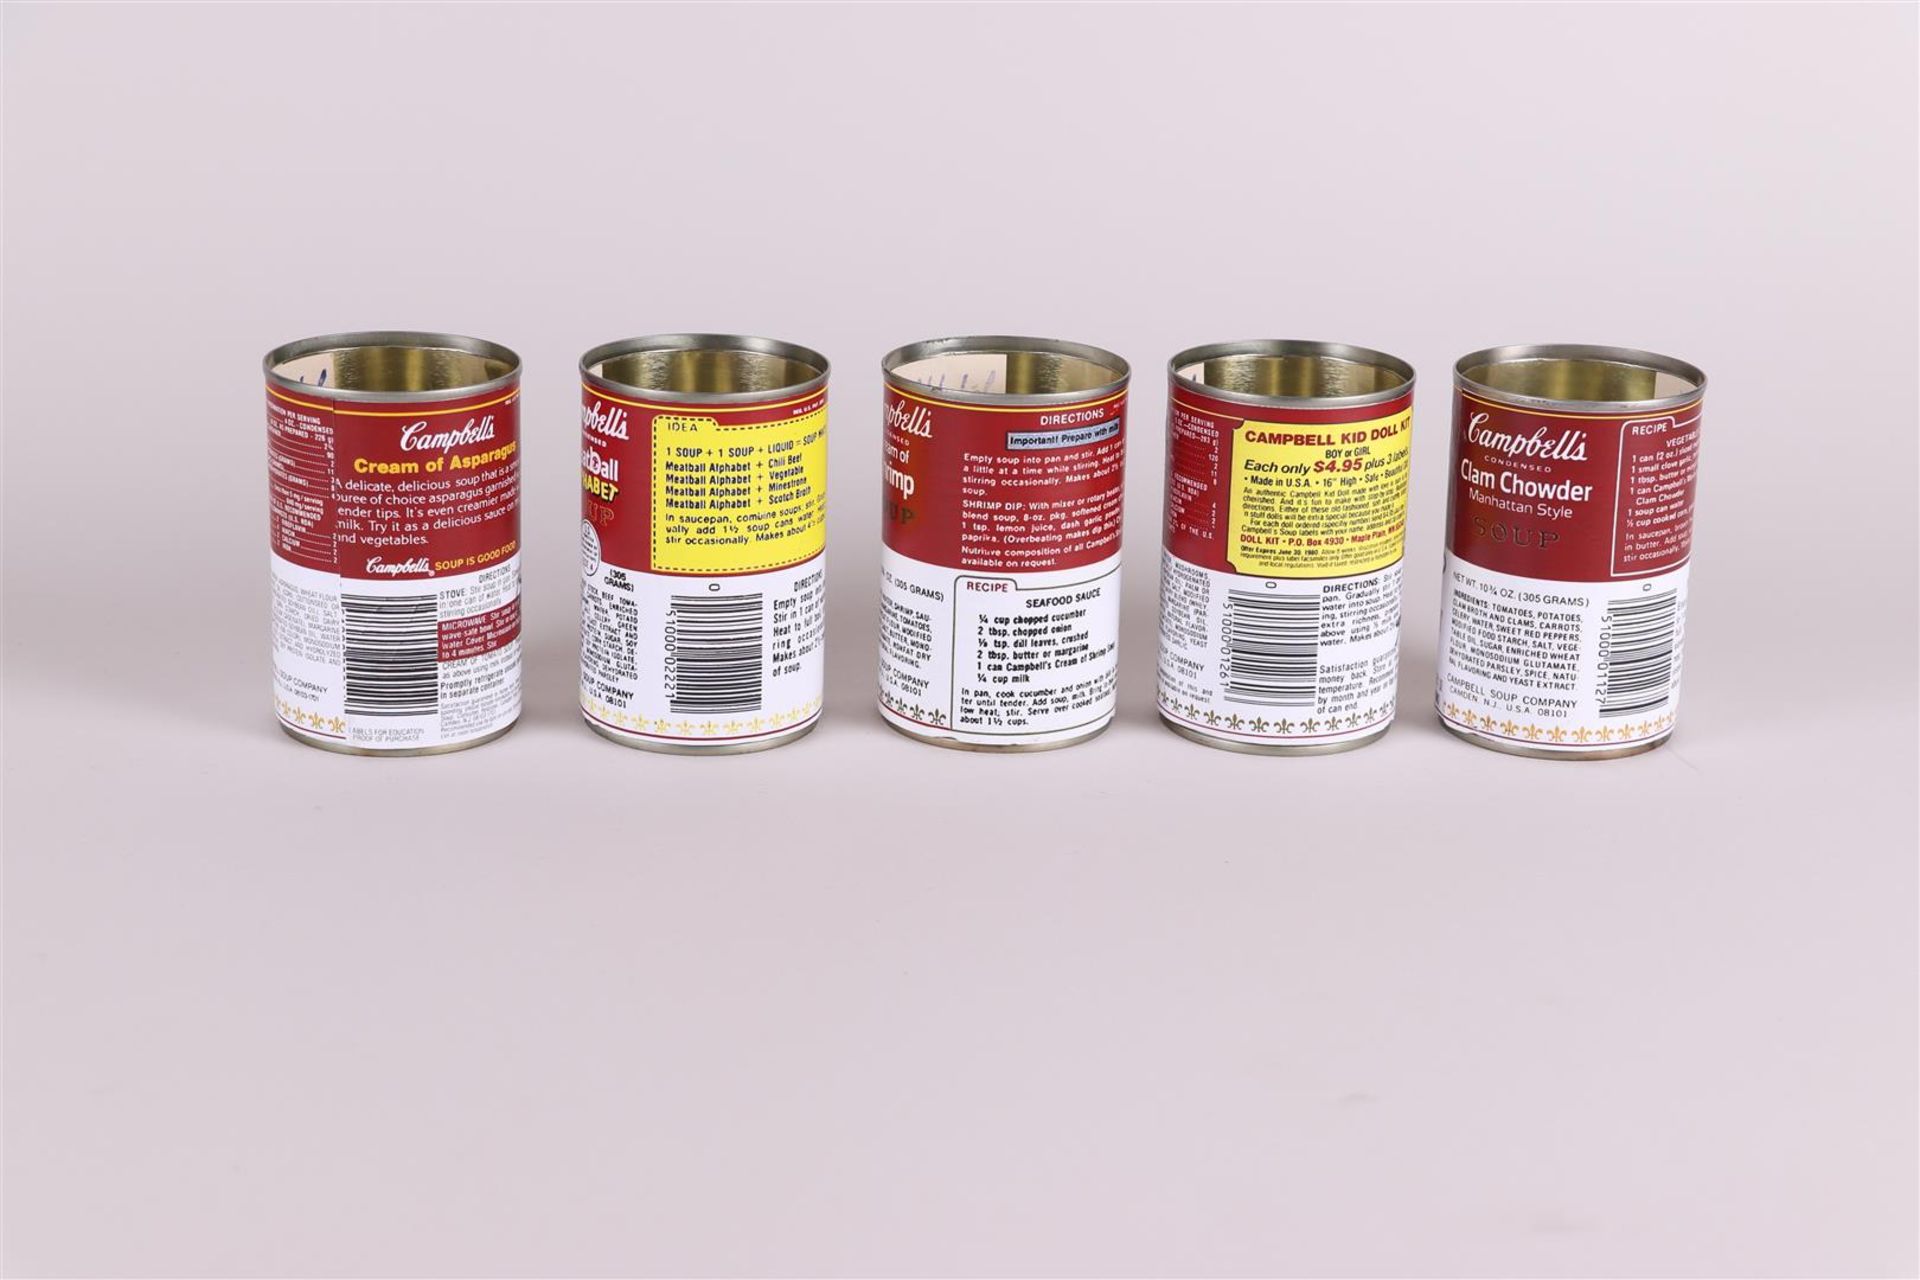 Andy Warhol (Pittsburgh, , 1928 - 1987 New York ), (after), (5x) Campbell's Tomato Soup cans - Image 4 of 9